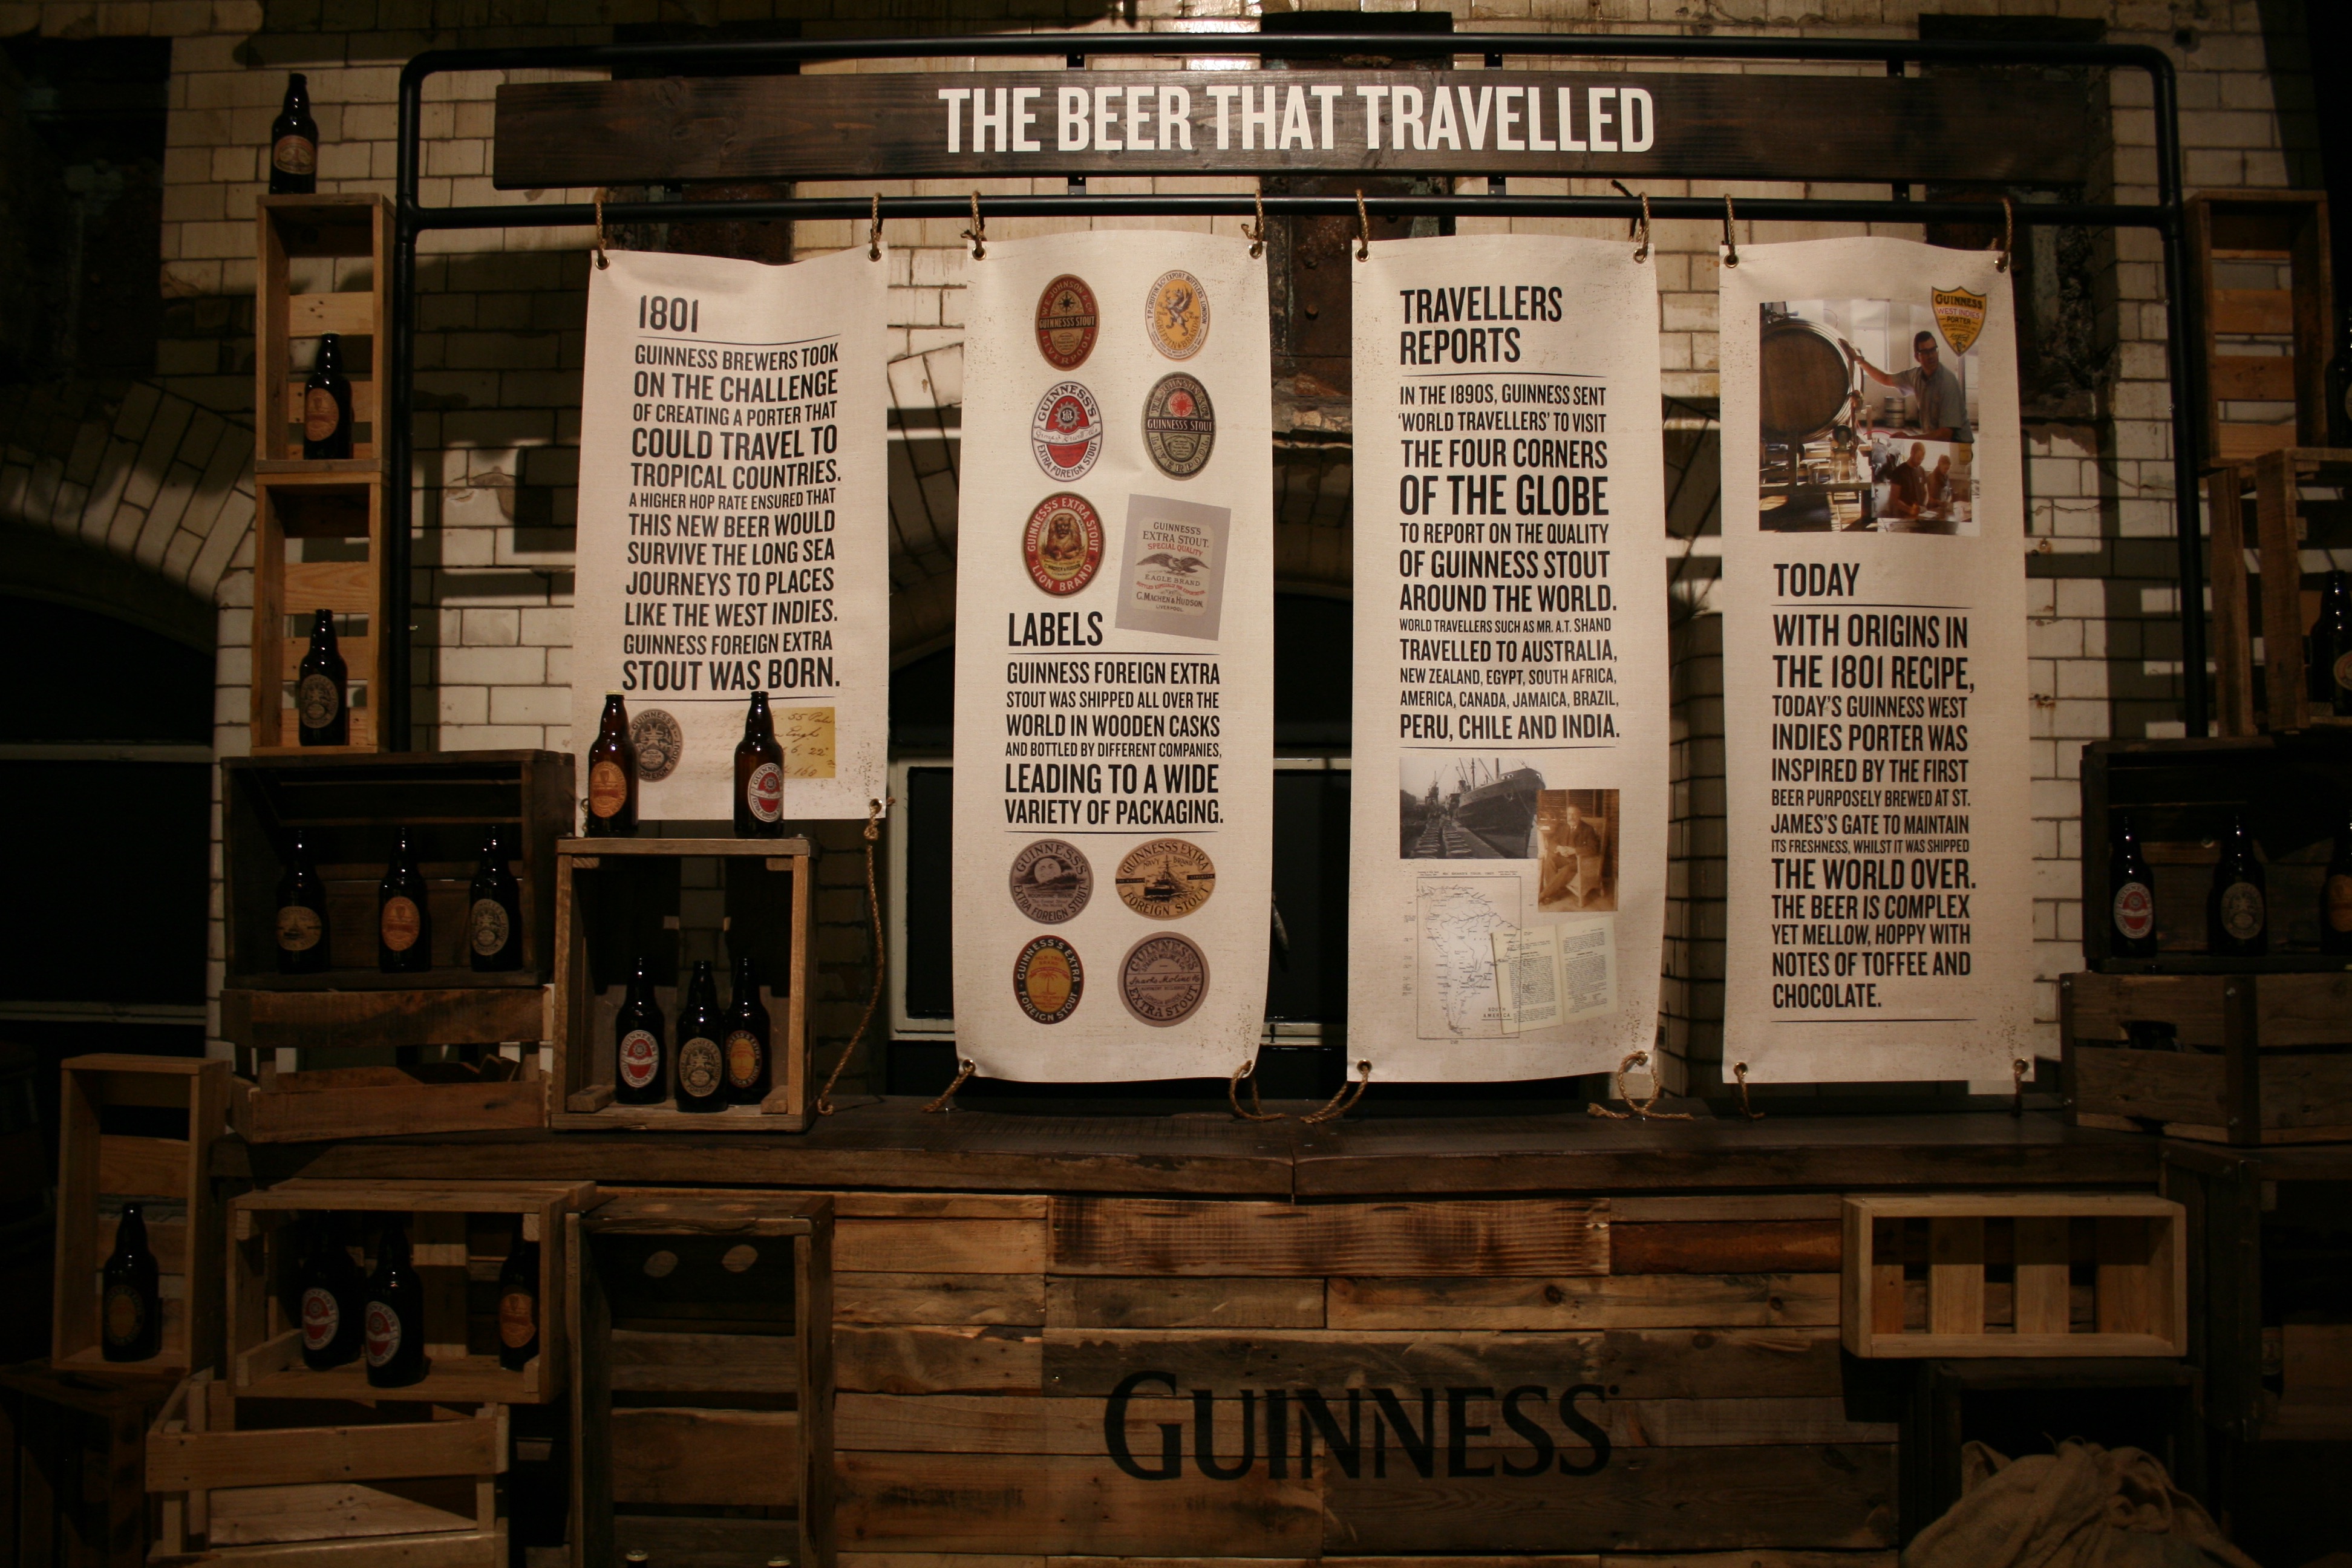 Guinness has traveled very far in its 257 years of existence.